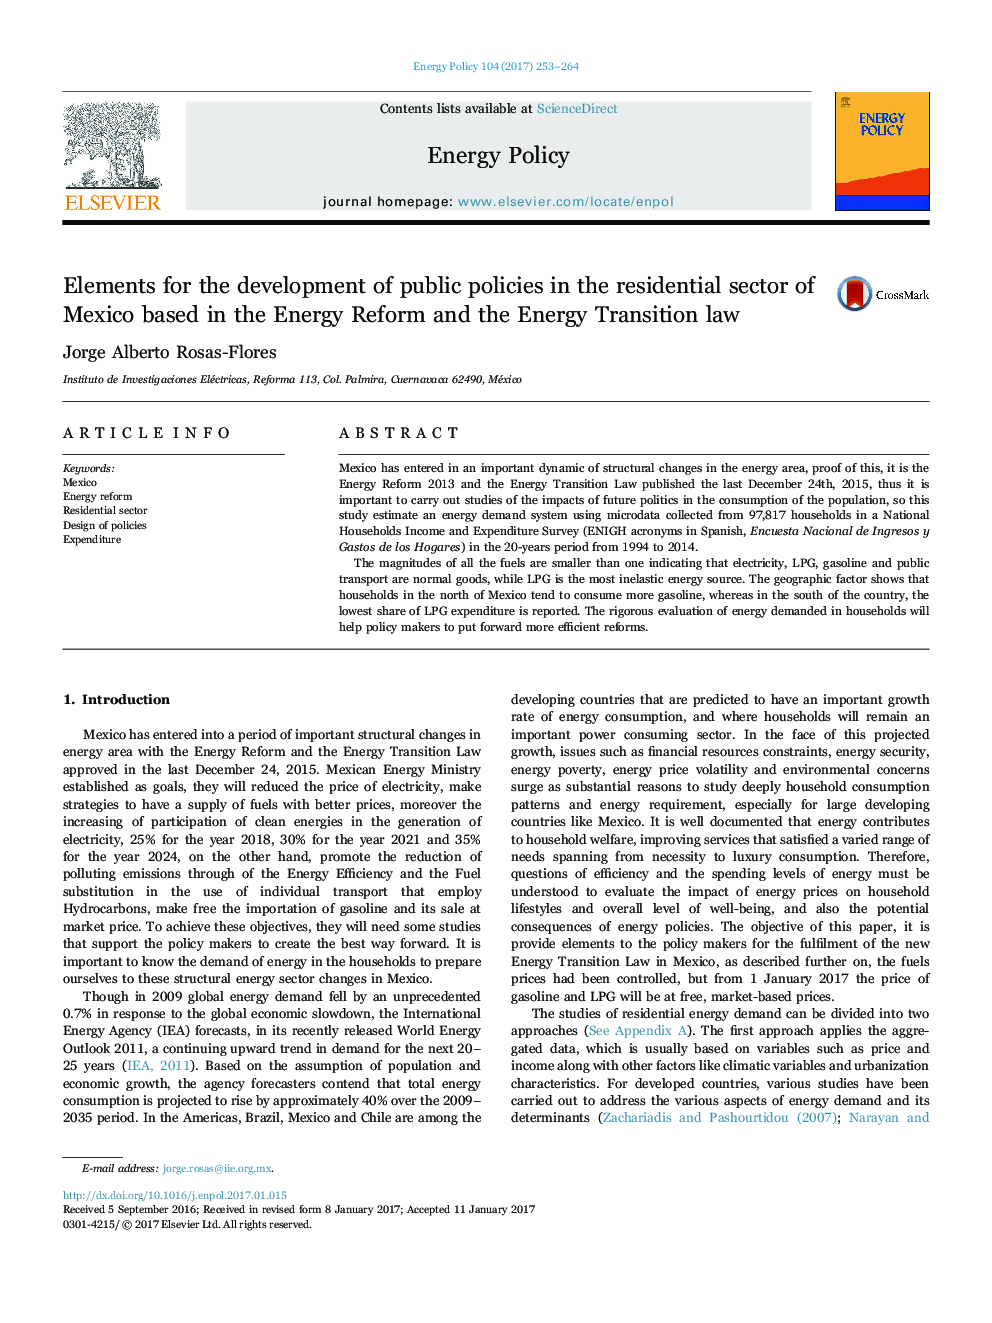 Elements for the development of public policies in the residential sector of Mexico based in the Energy Reform and the Energy Transition law